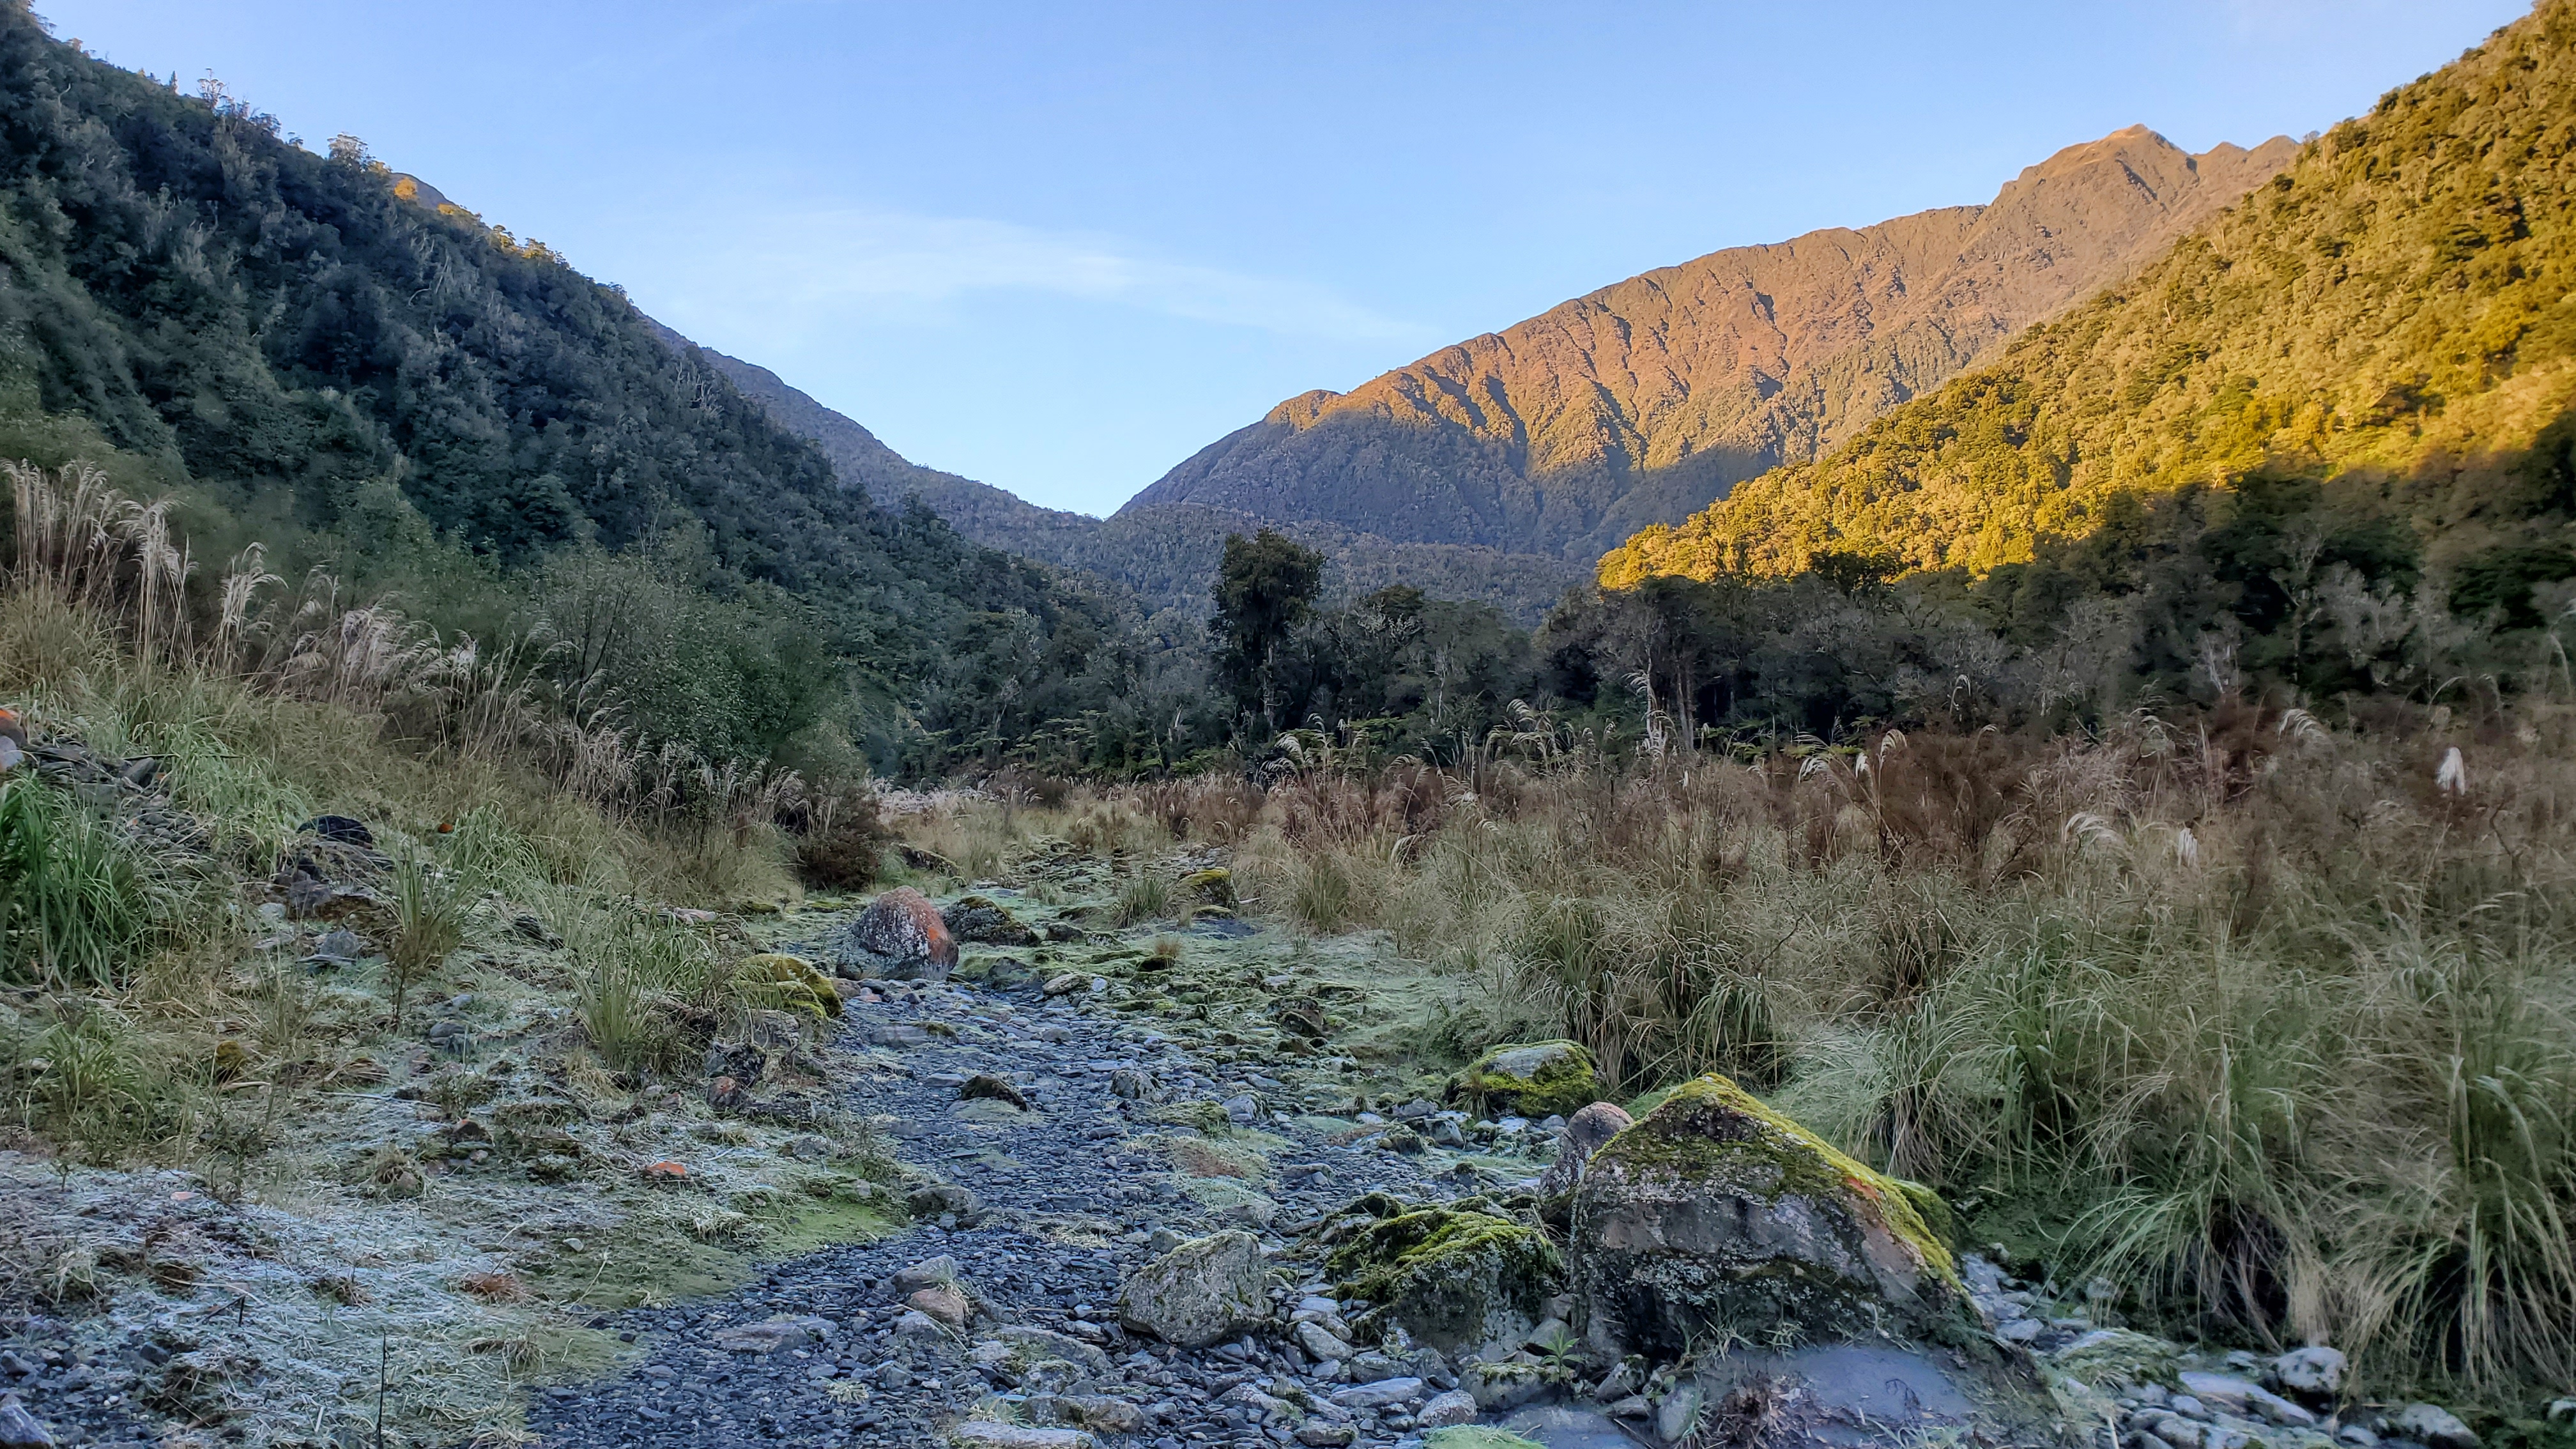 A frosty morning on the Toaroha River